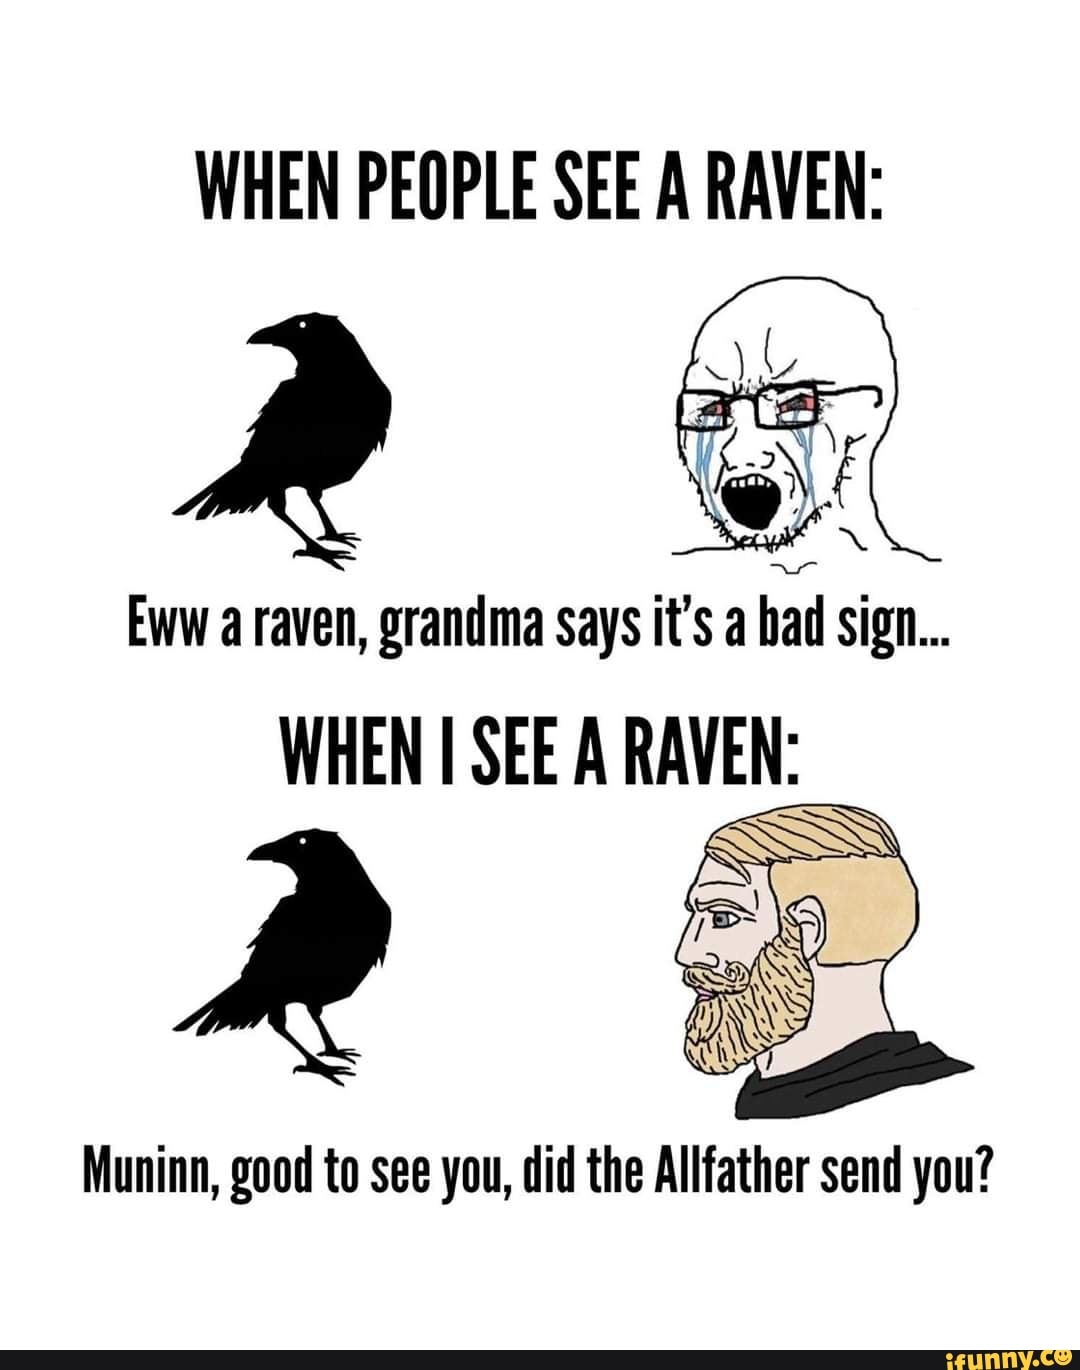 WHEN PEOPLE SEE A RAVEN: XX Eww raven, grandma says it's a bad Sign......